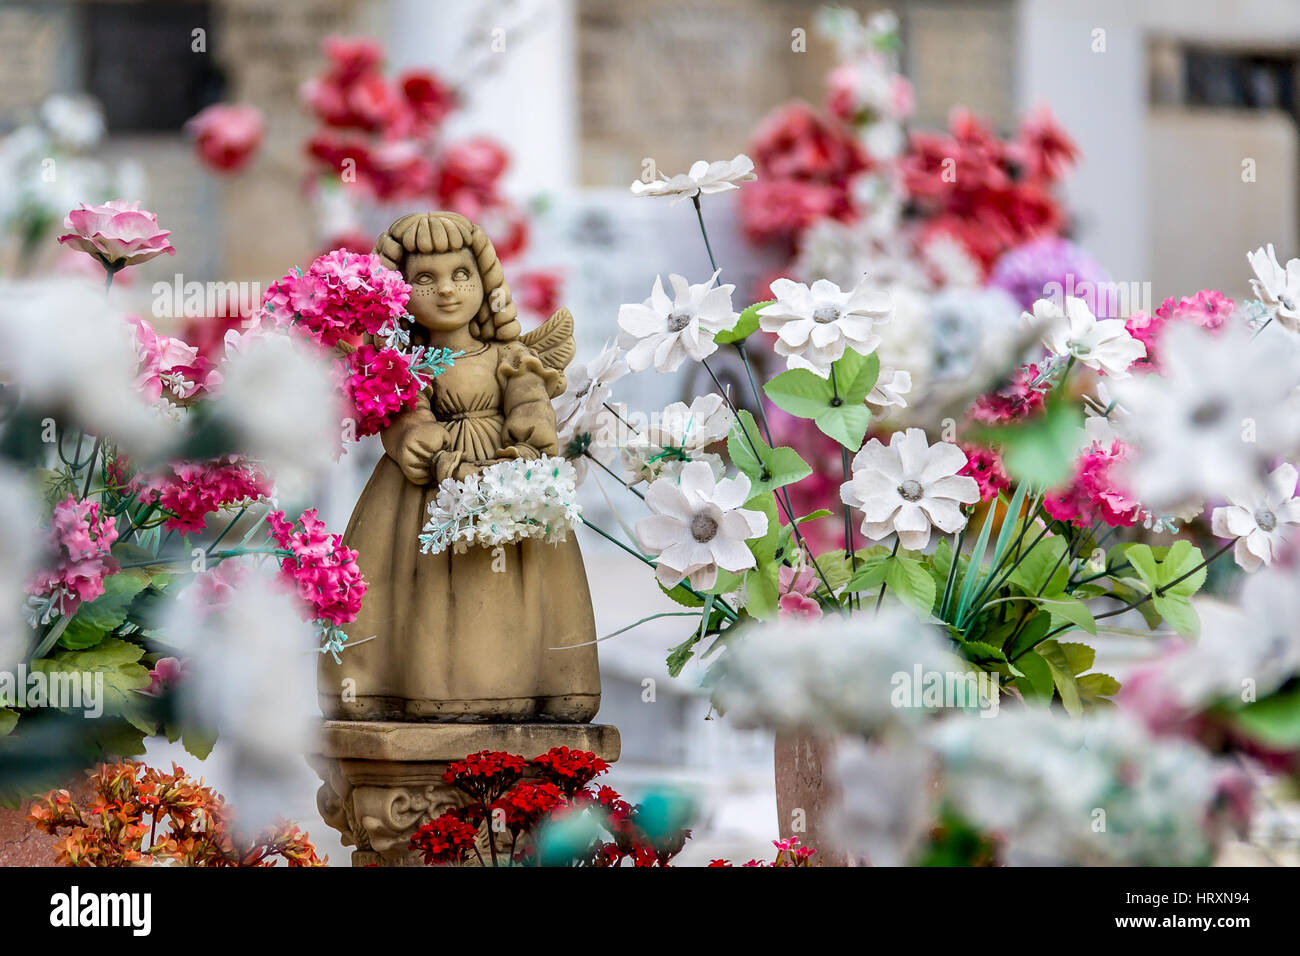 Cute angel girl statue and flowers Stock Photo